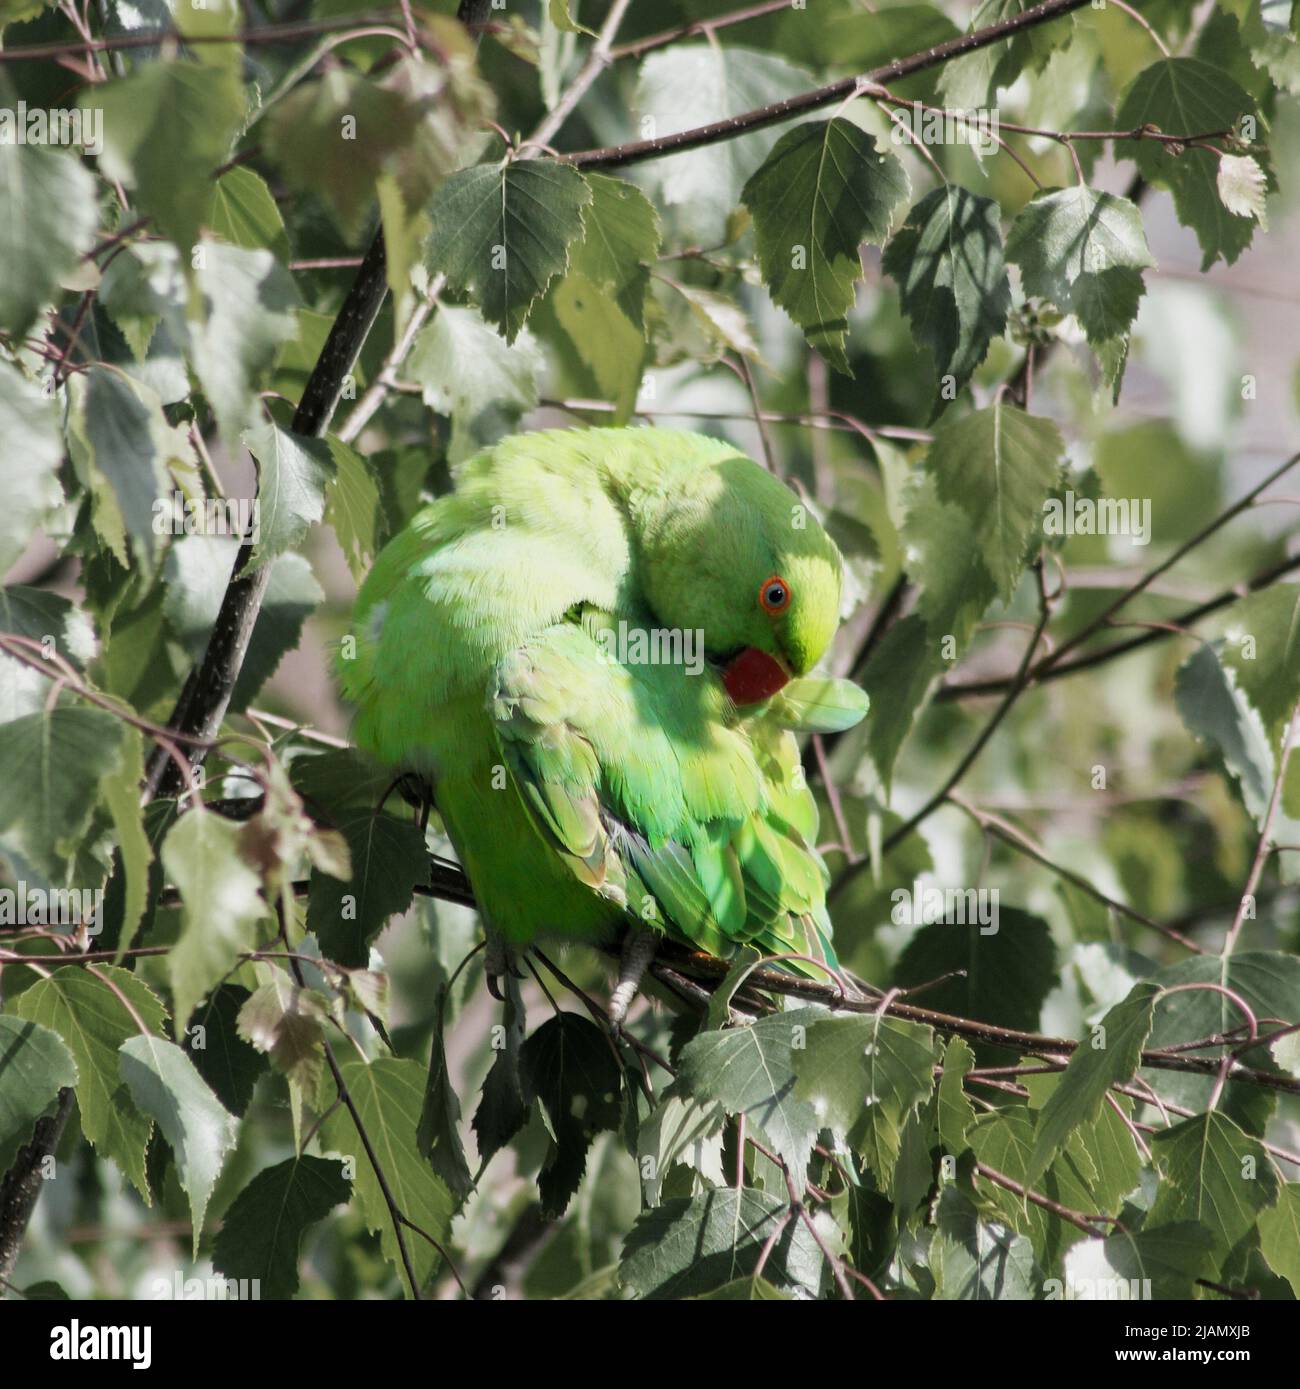 A rose-ringed parakeet in a broadleaf tree, busy preening itself. The bird is preening its back feathers. Stock Photo